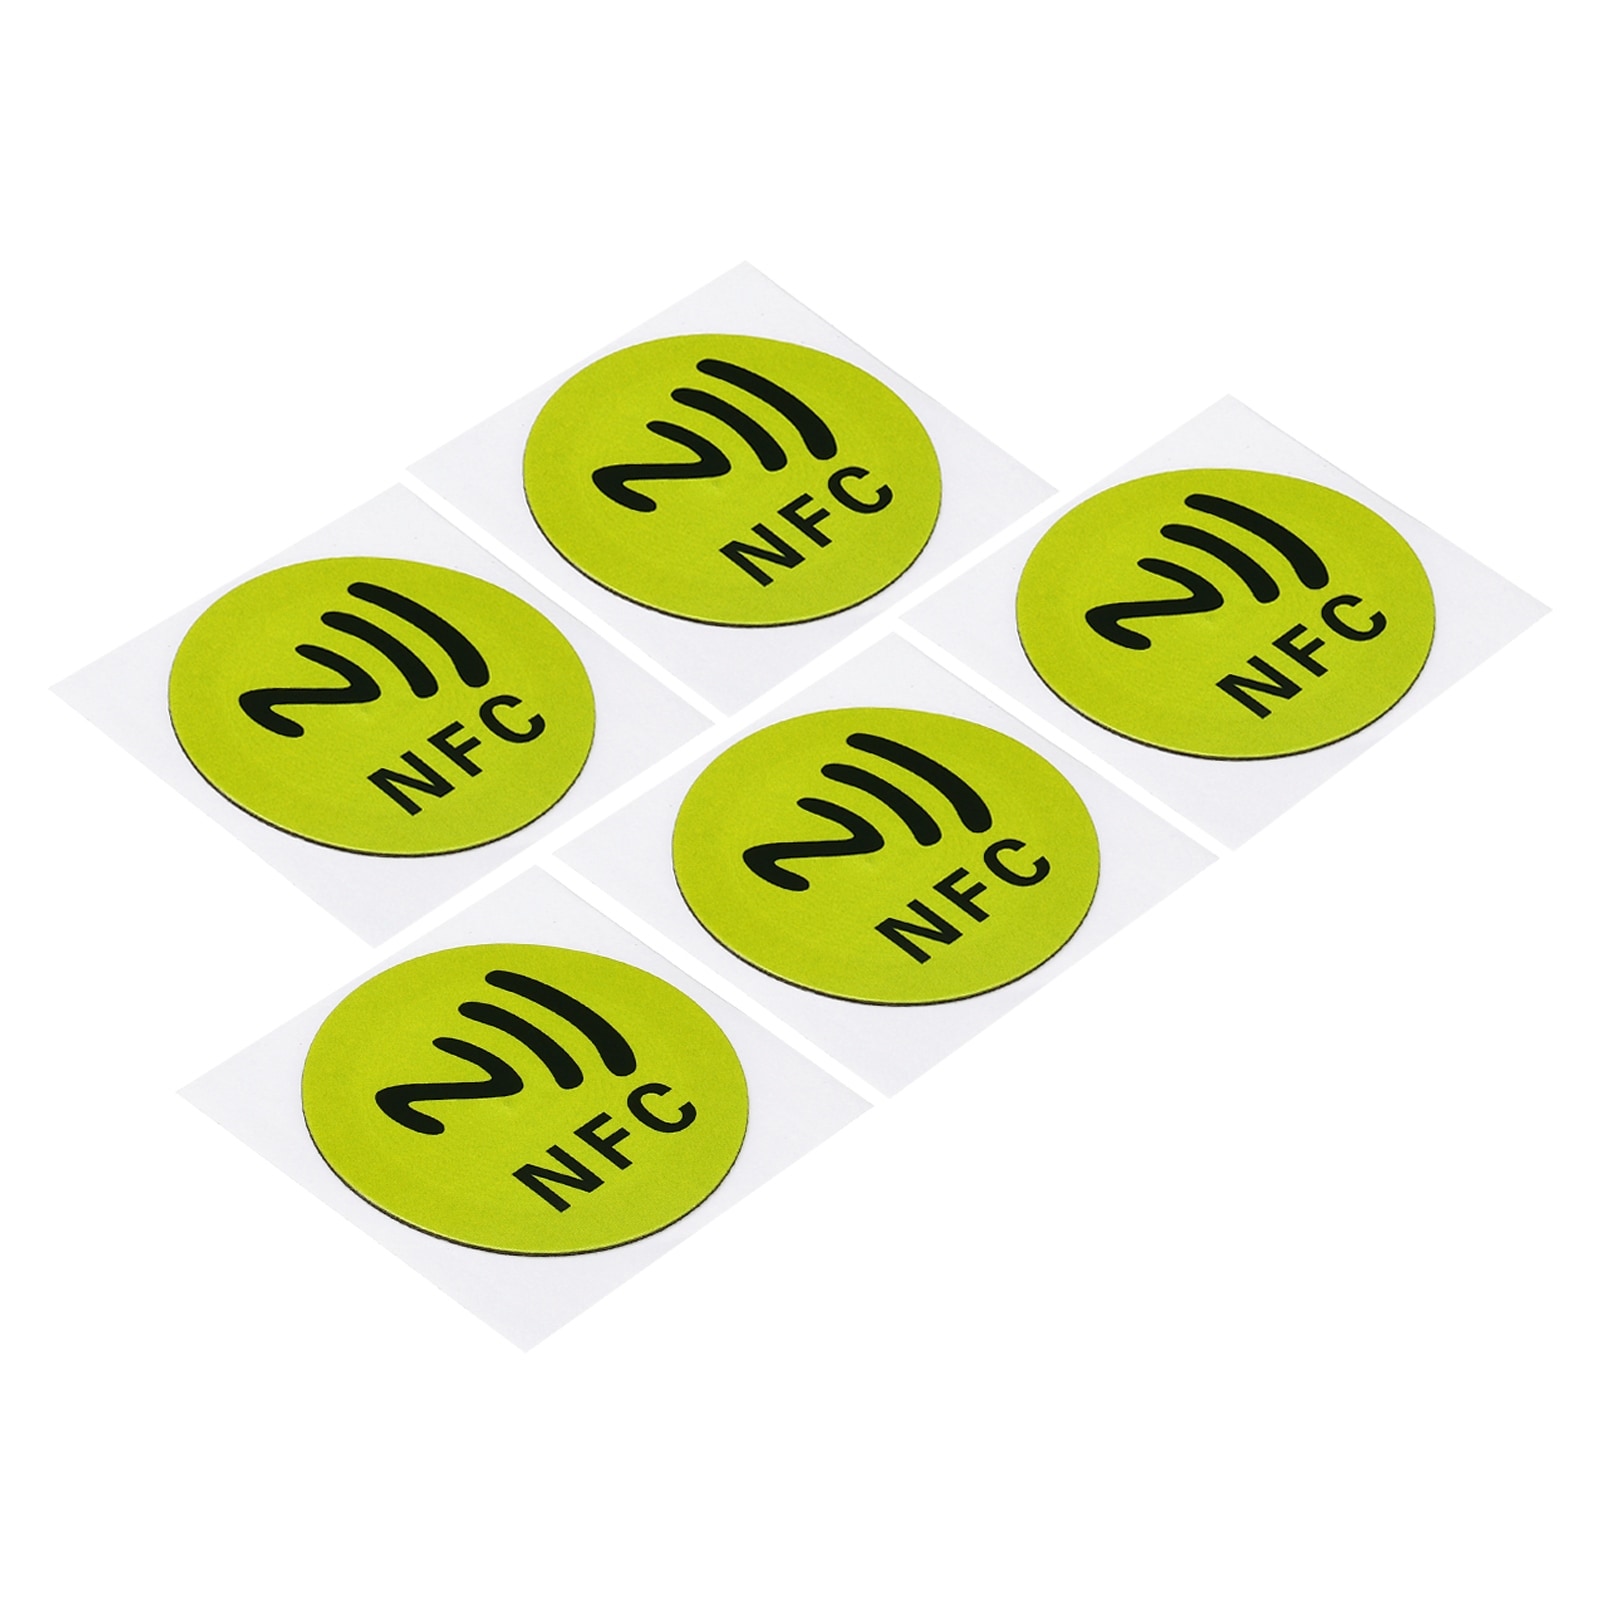 5Pcs NFC Stickers NFC213 Tag Sticker 144 Bytes Blank Round NFC Tags Red